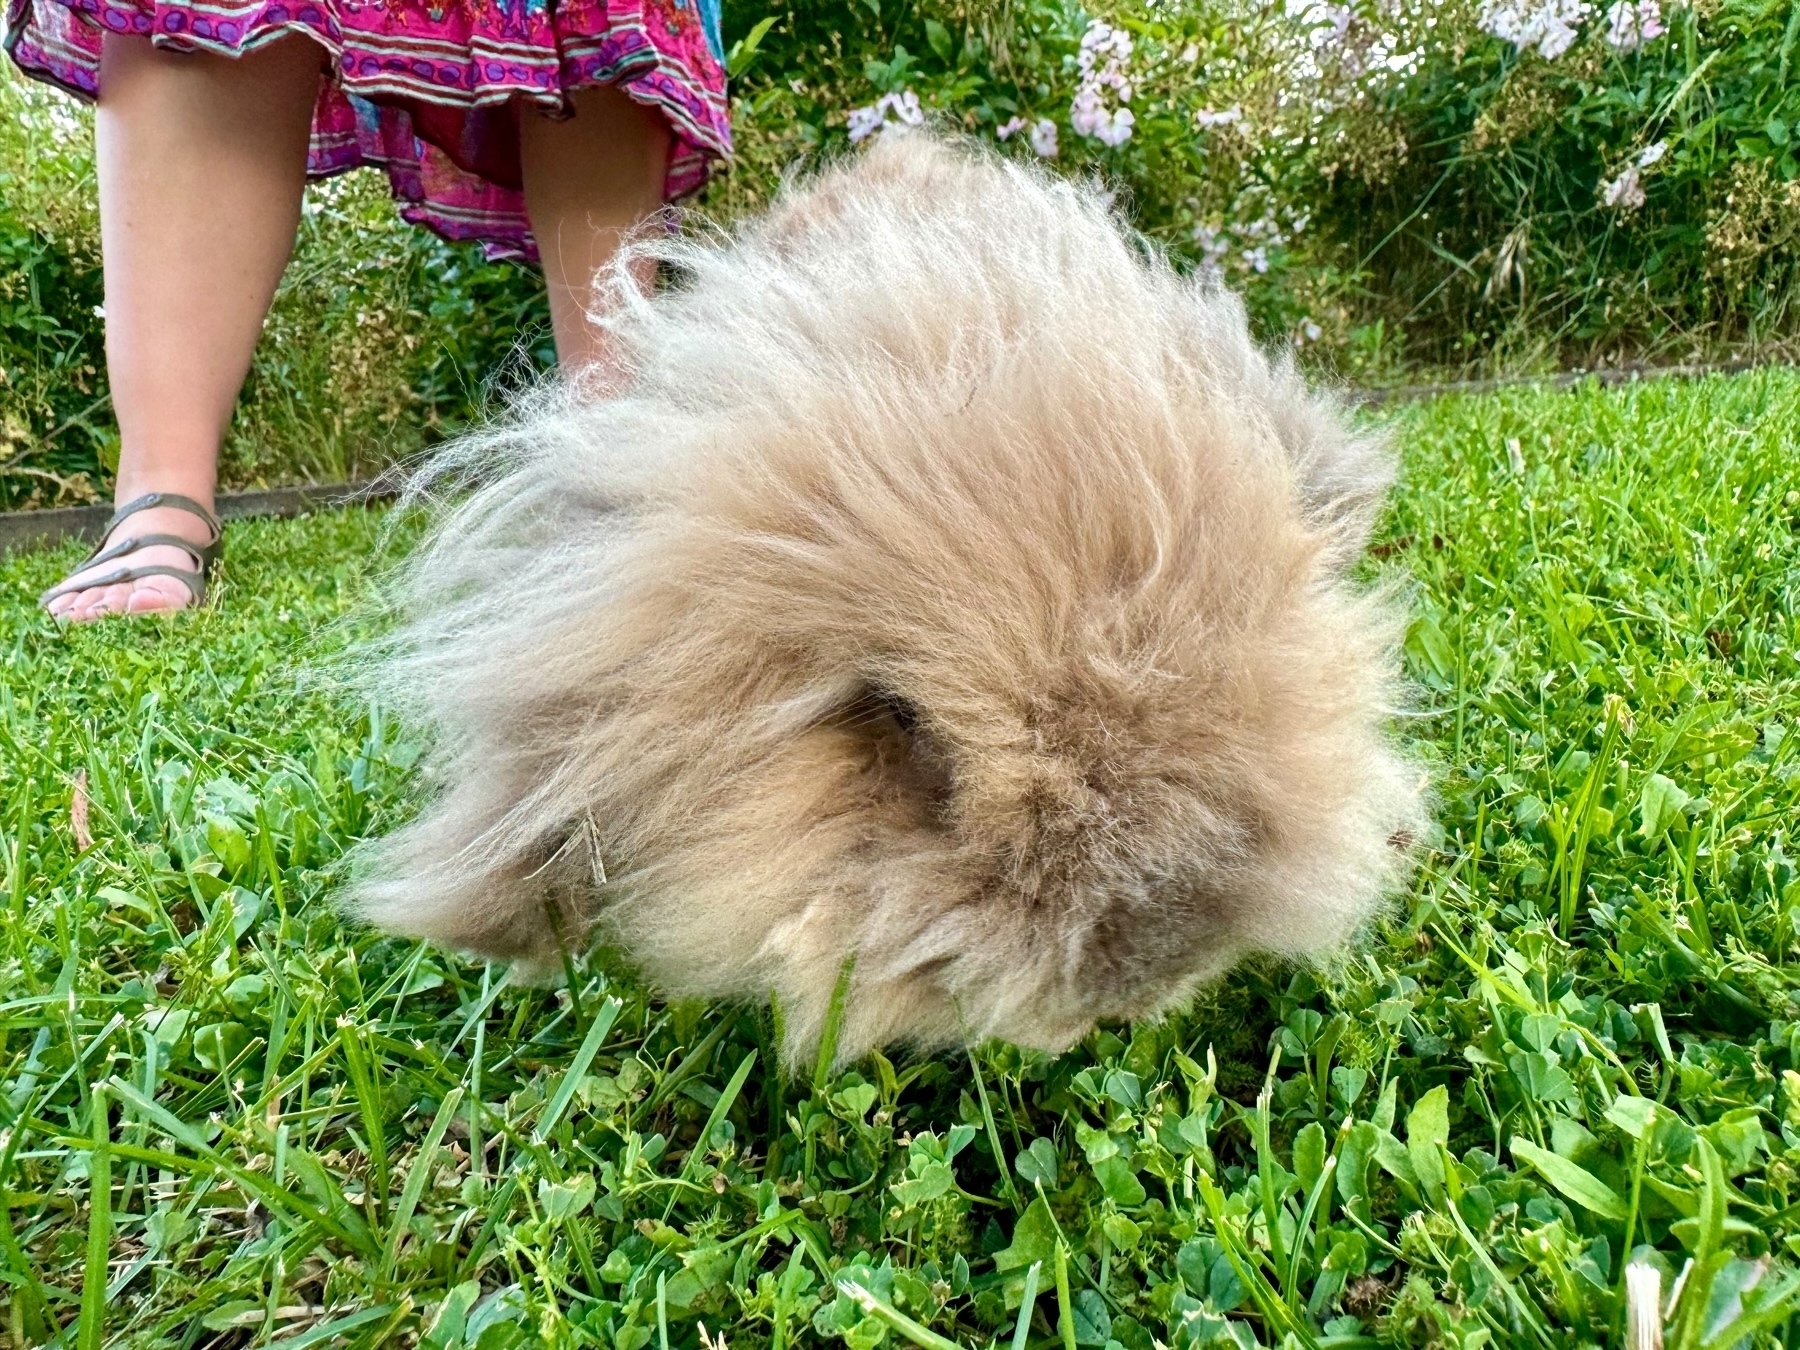 A fluffy, long-haired rabbit eating grass in a garden. In the background, a person in a colorful skirt and sandals stands on the lawn. Flowering plants and greenery surround the area.